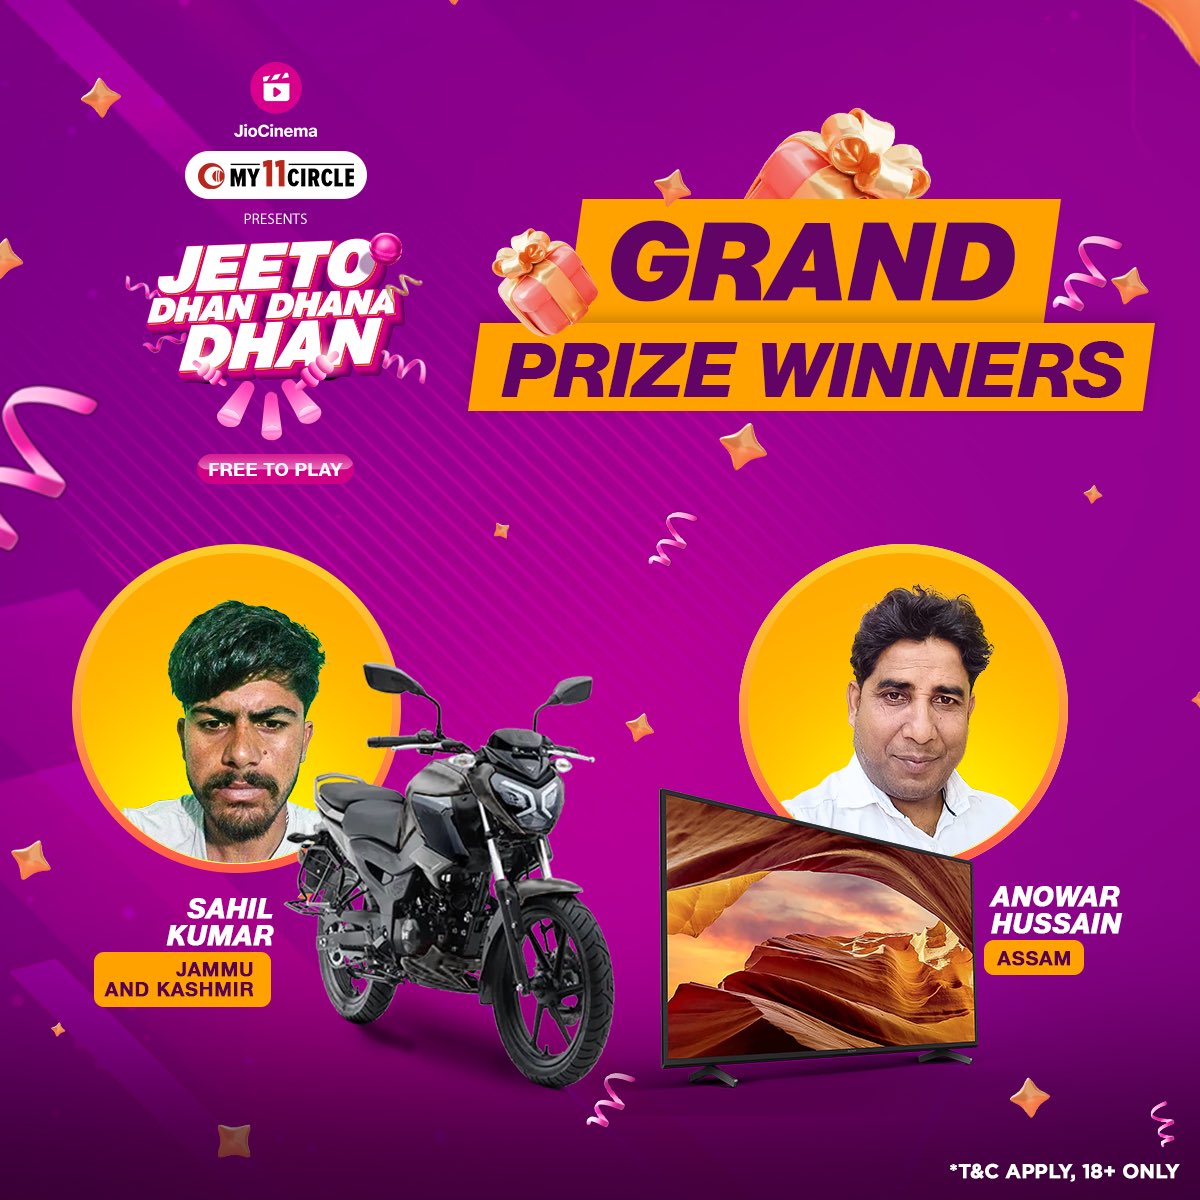 Congratulations to the winners of Match 38! 🎉👏

Play and stand a chance to win daily with #My11Circle presents #JeetoDhanDhanaDhan only on #JioCinema. 🥳

Keep playing & don’t forget to make your team on @My11Circle app!

*T&C Apply, 18+